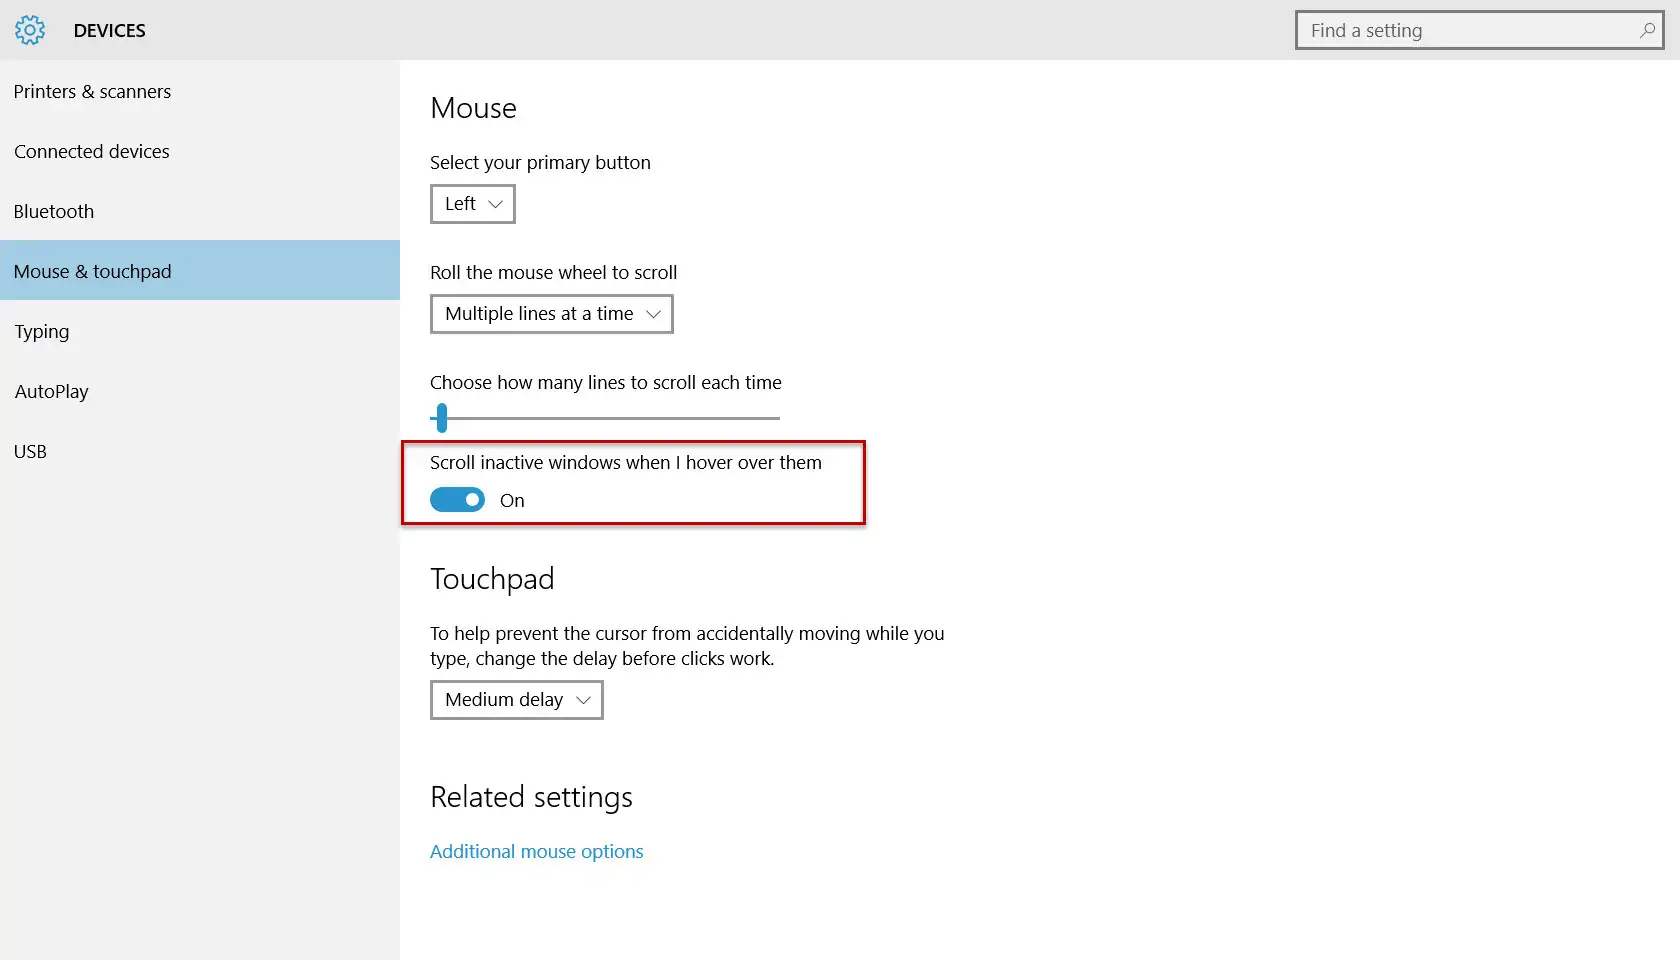 Windows 10 Settings - Mouse & touchpad